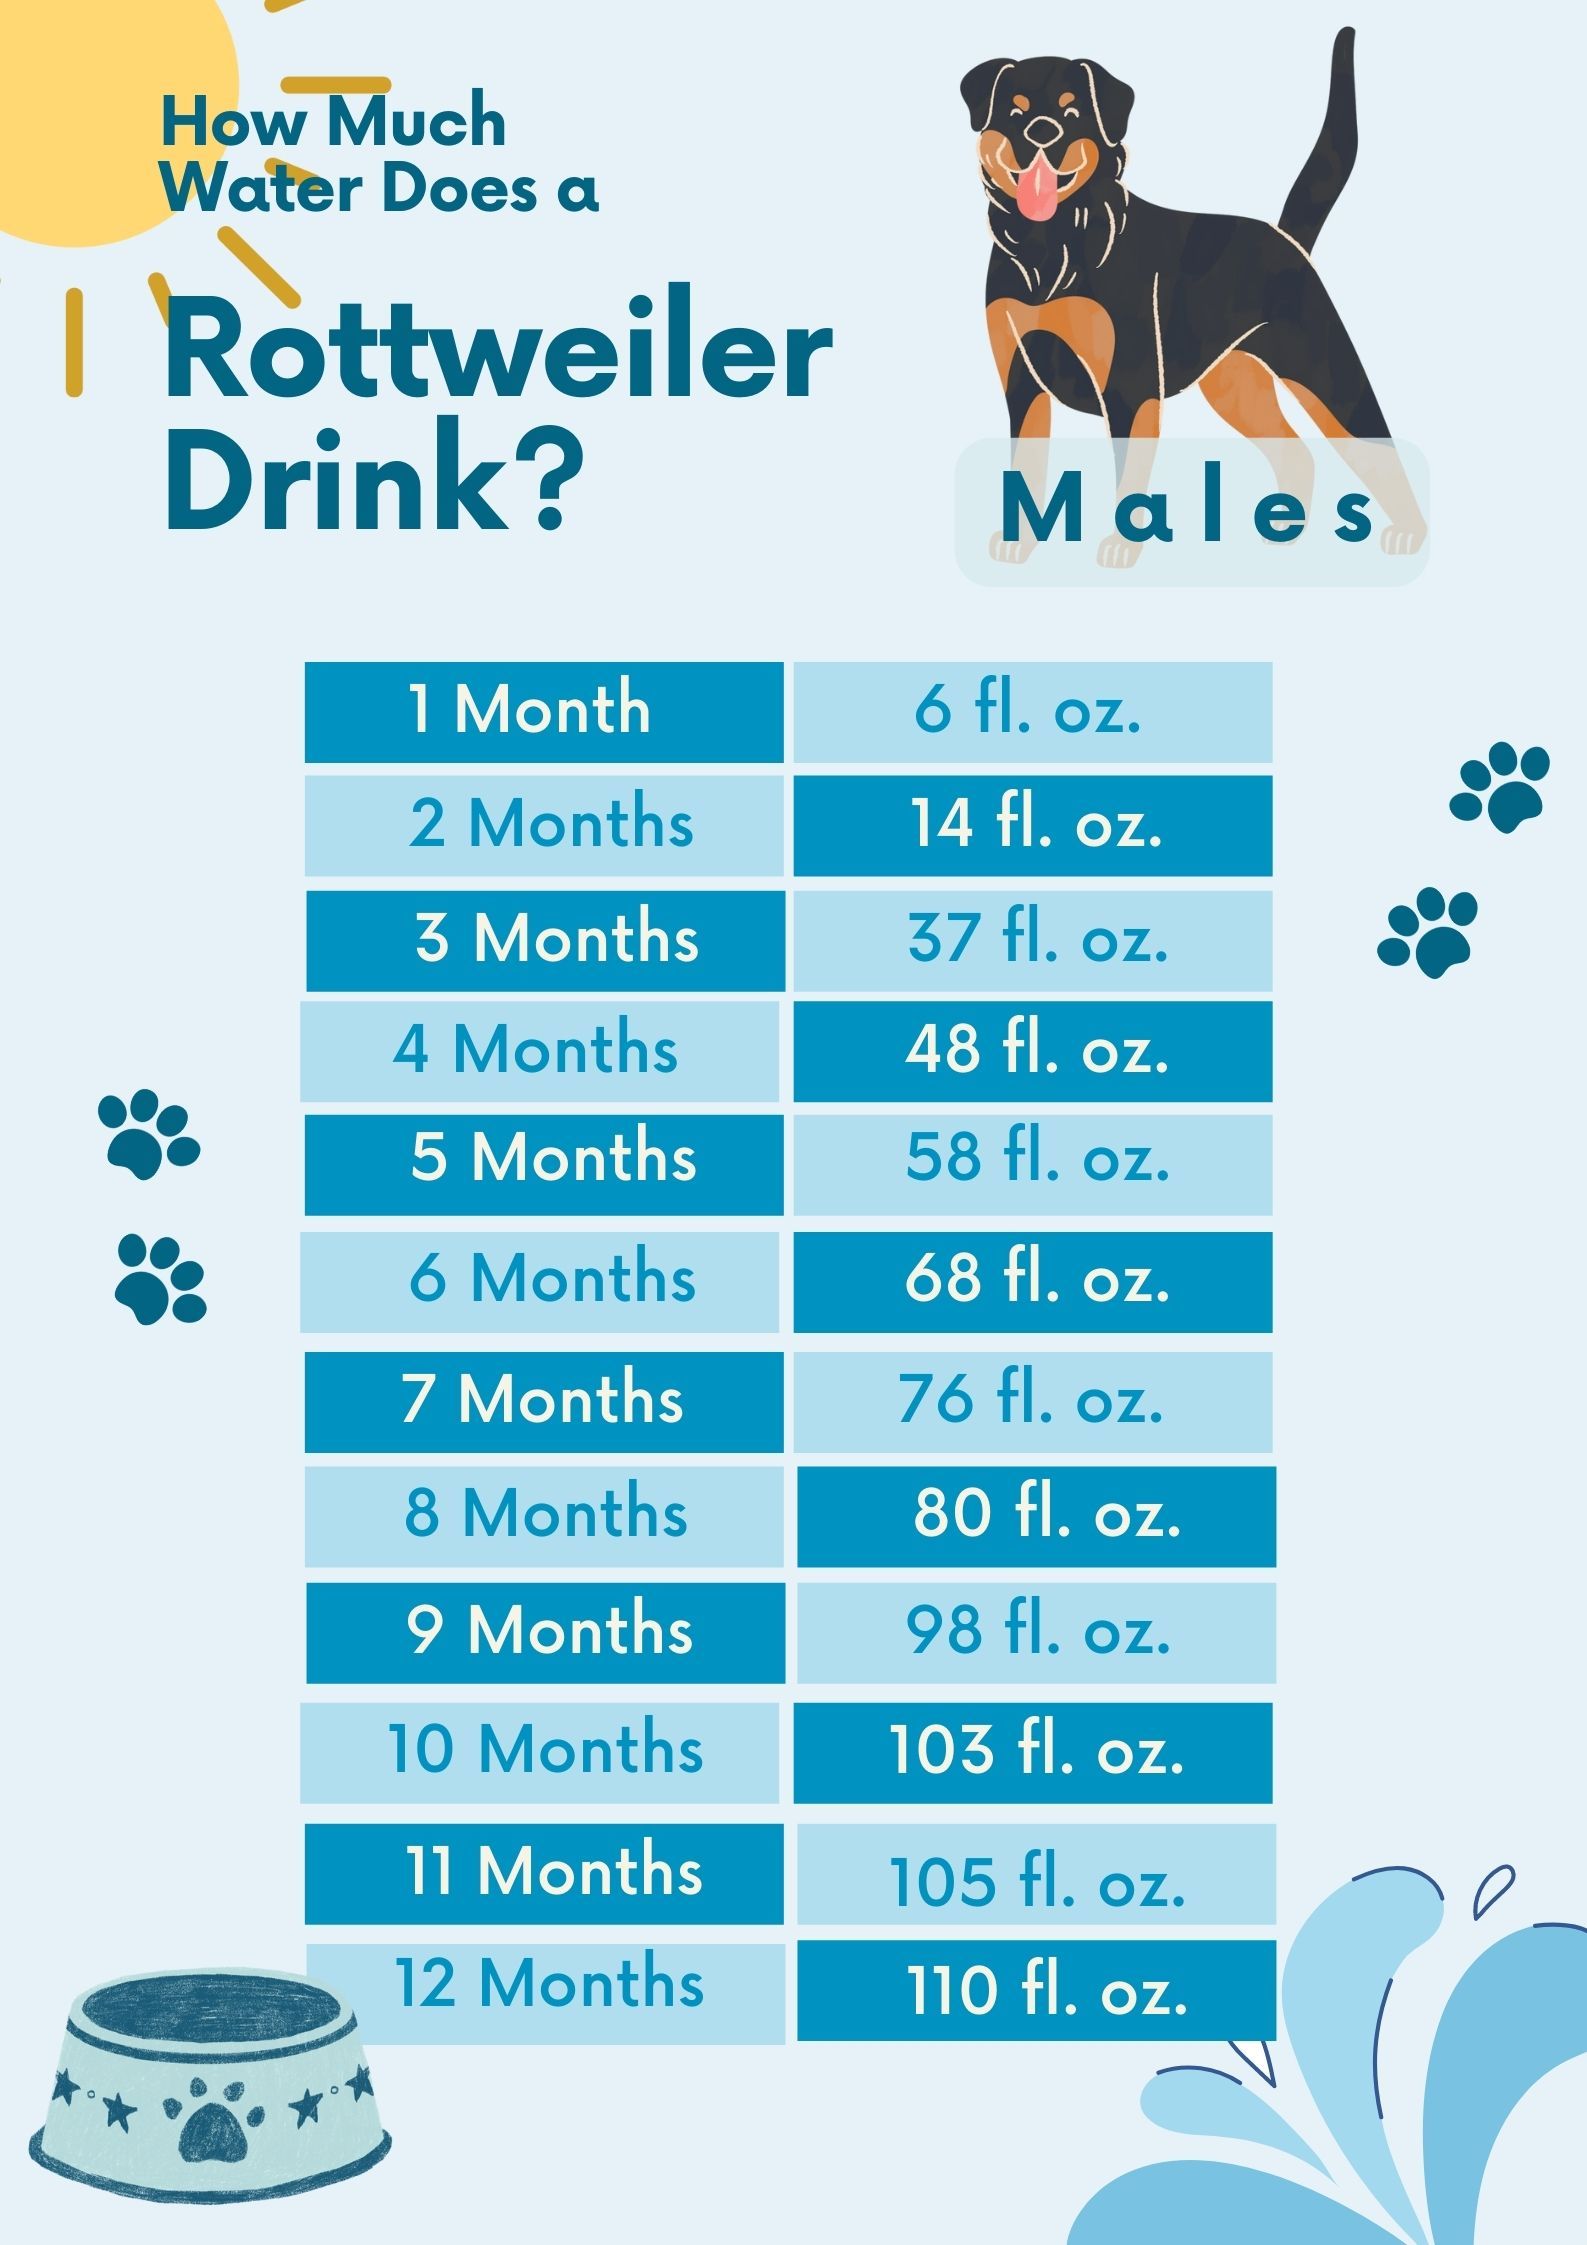 How Much Does a Rottweiler Drink?